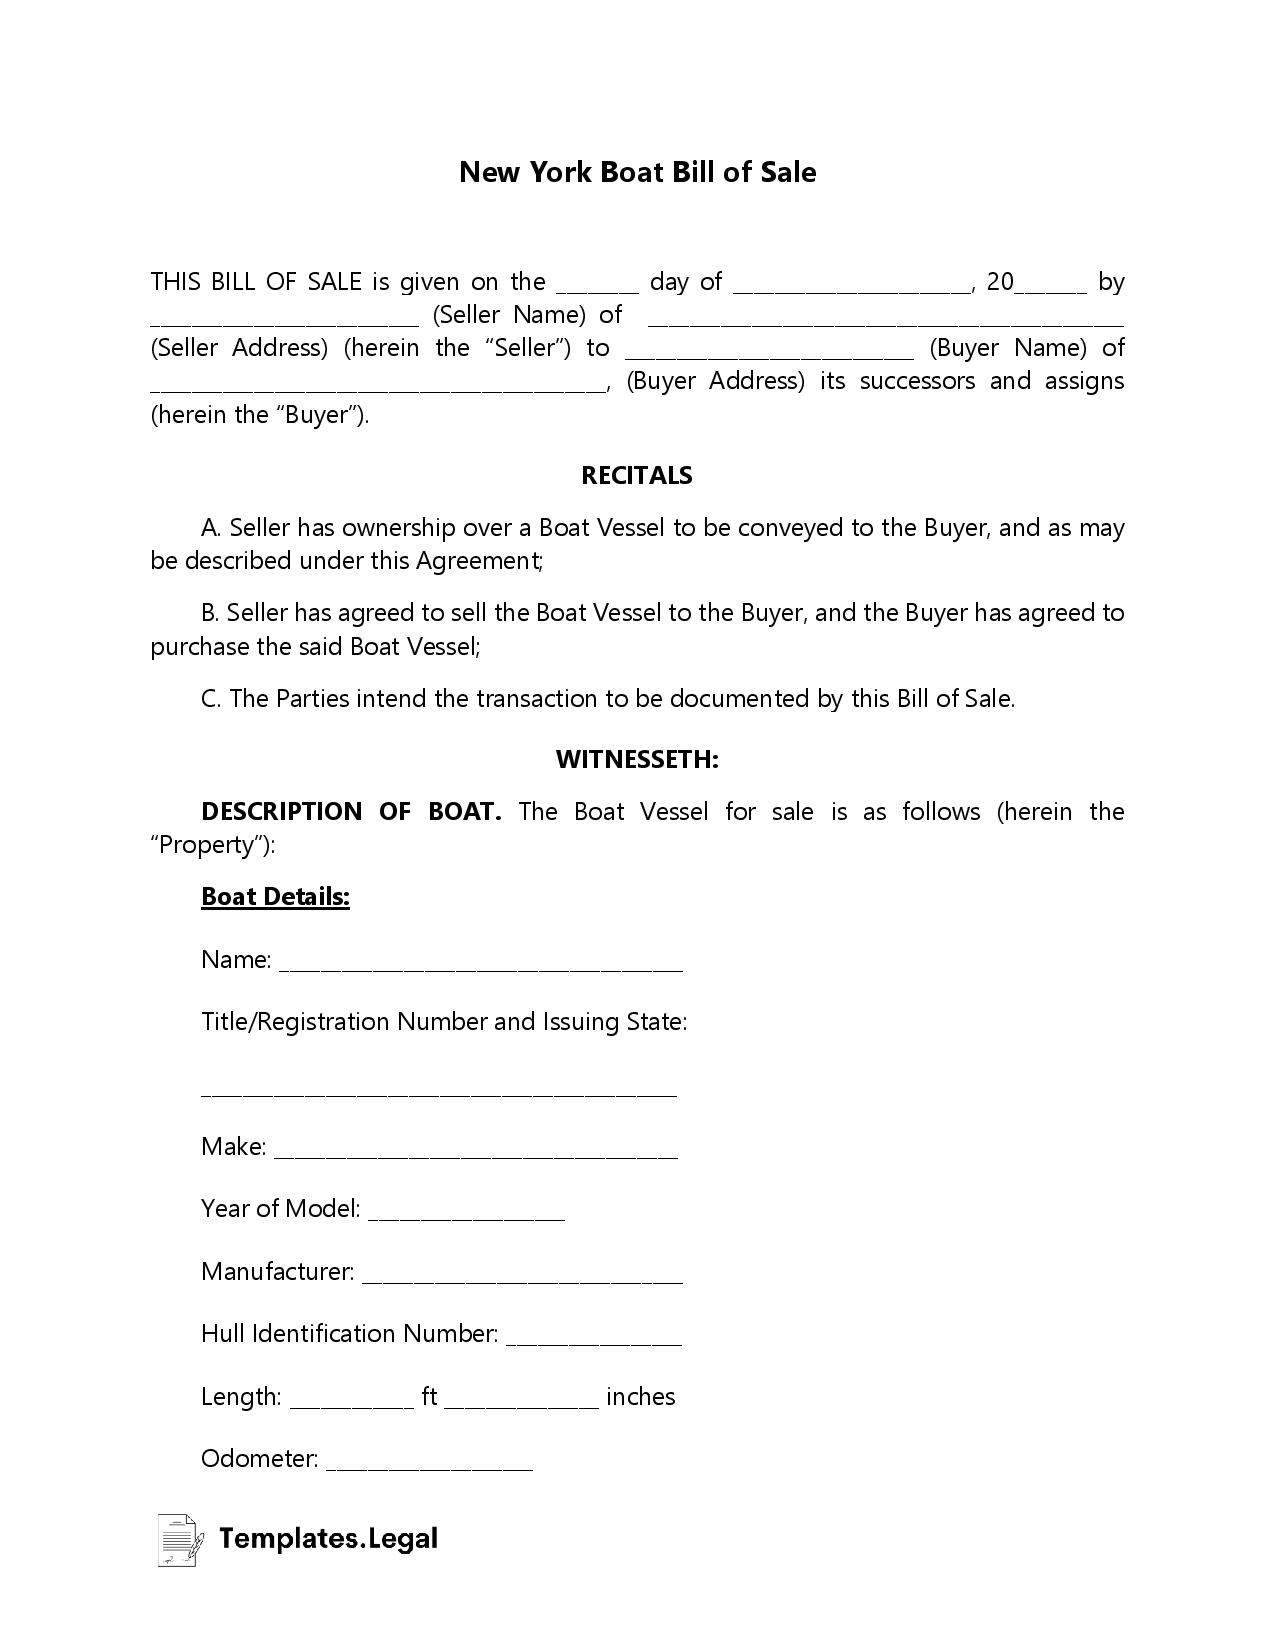 New York Boat Bill of Sale - Templates.Legal